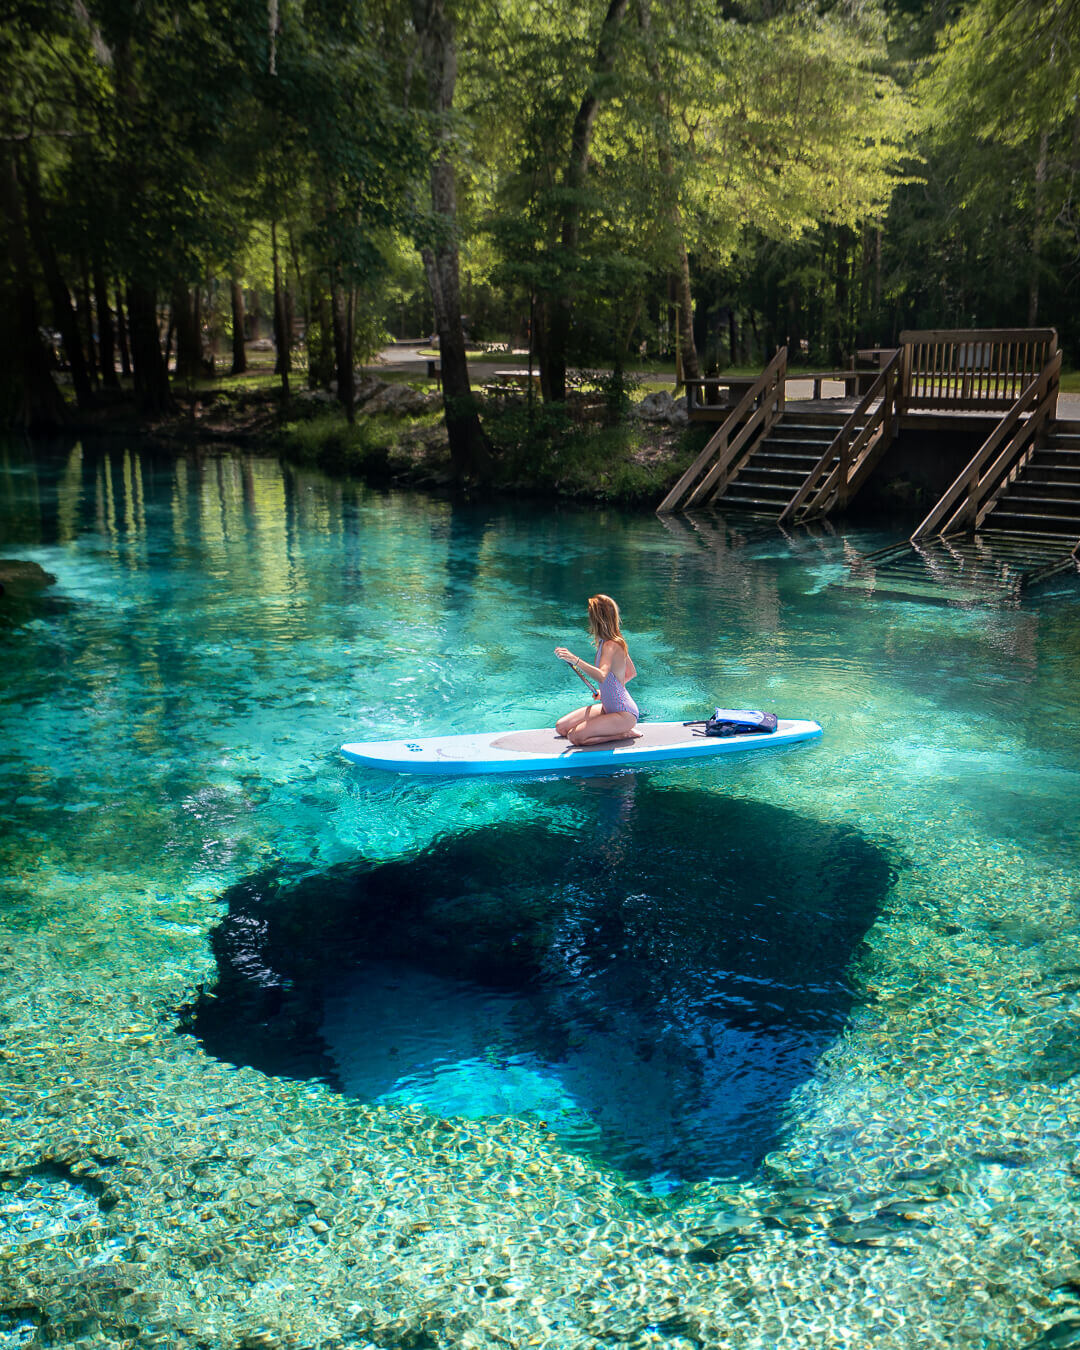 Ginnie Springs is just one of the stunning natural springs that dot Northern Florida’s landscape.